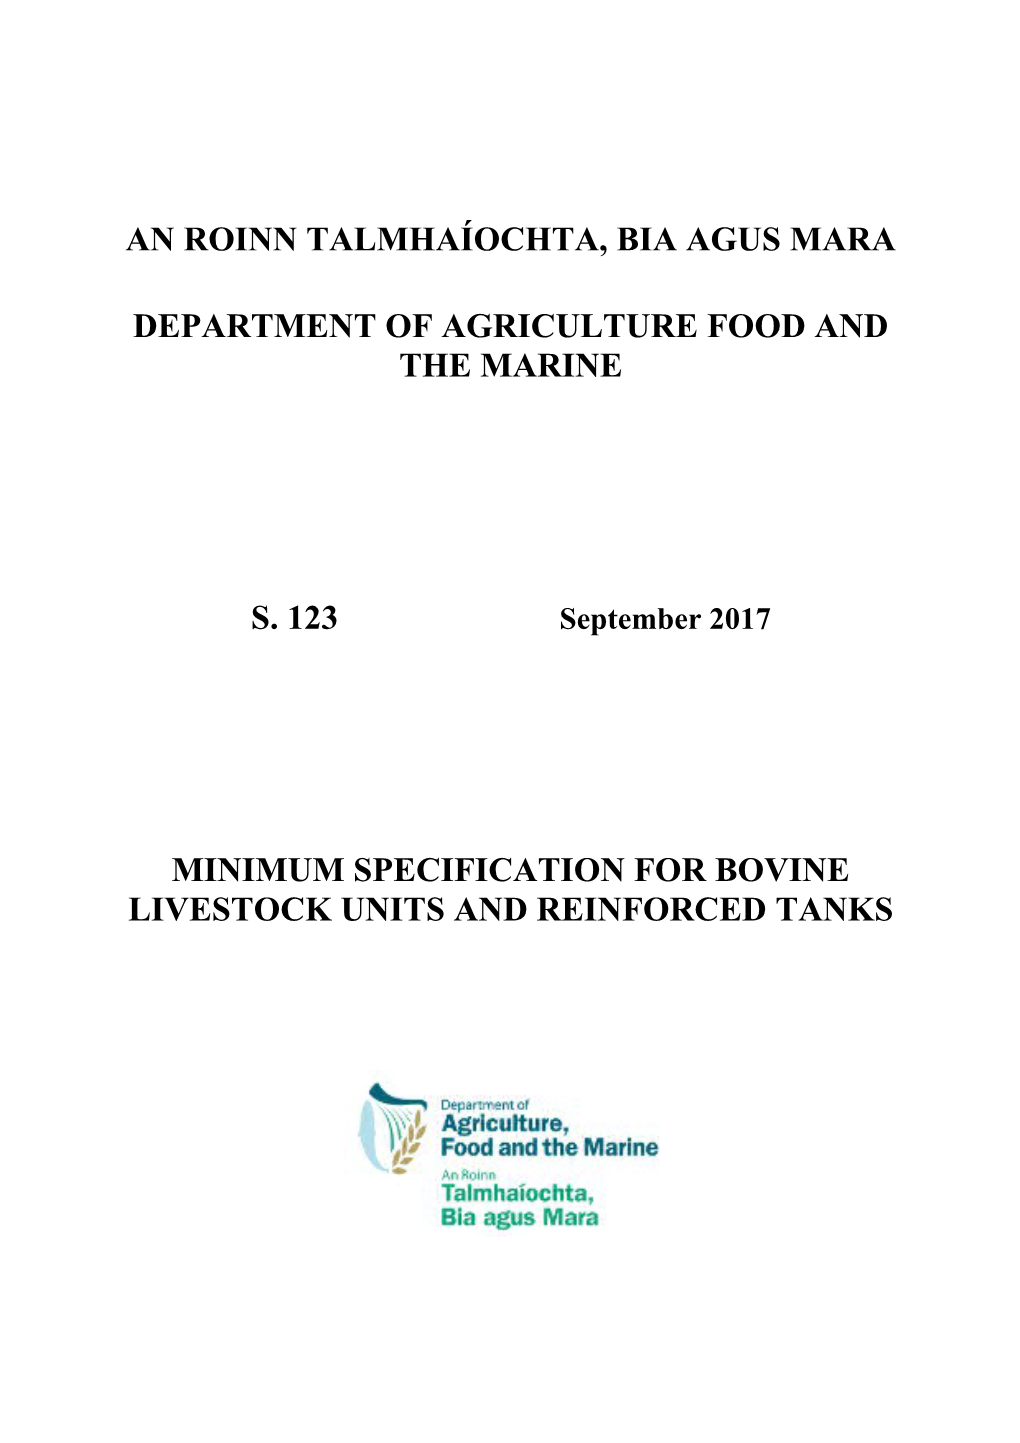 Minimum Specification for Bovine Livestock Units and Reinforced Tanks